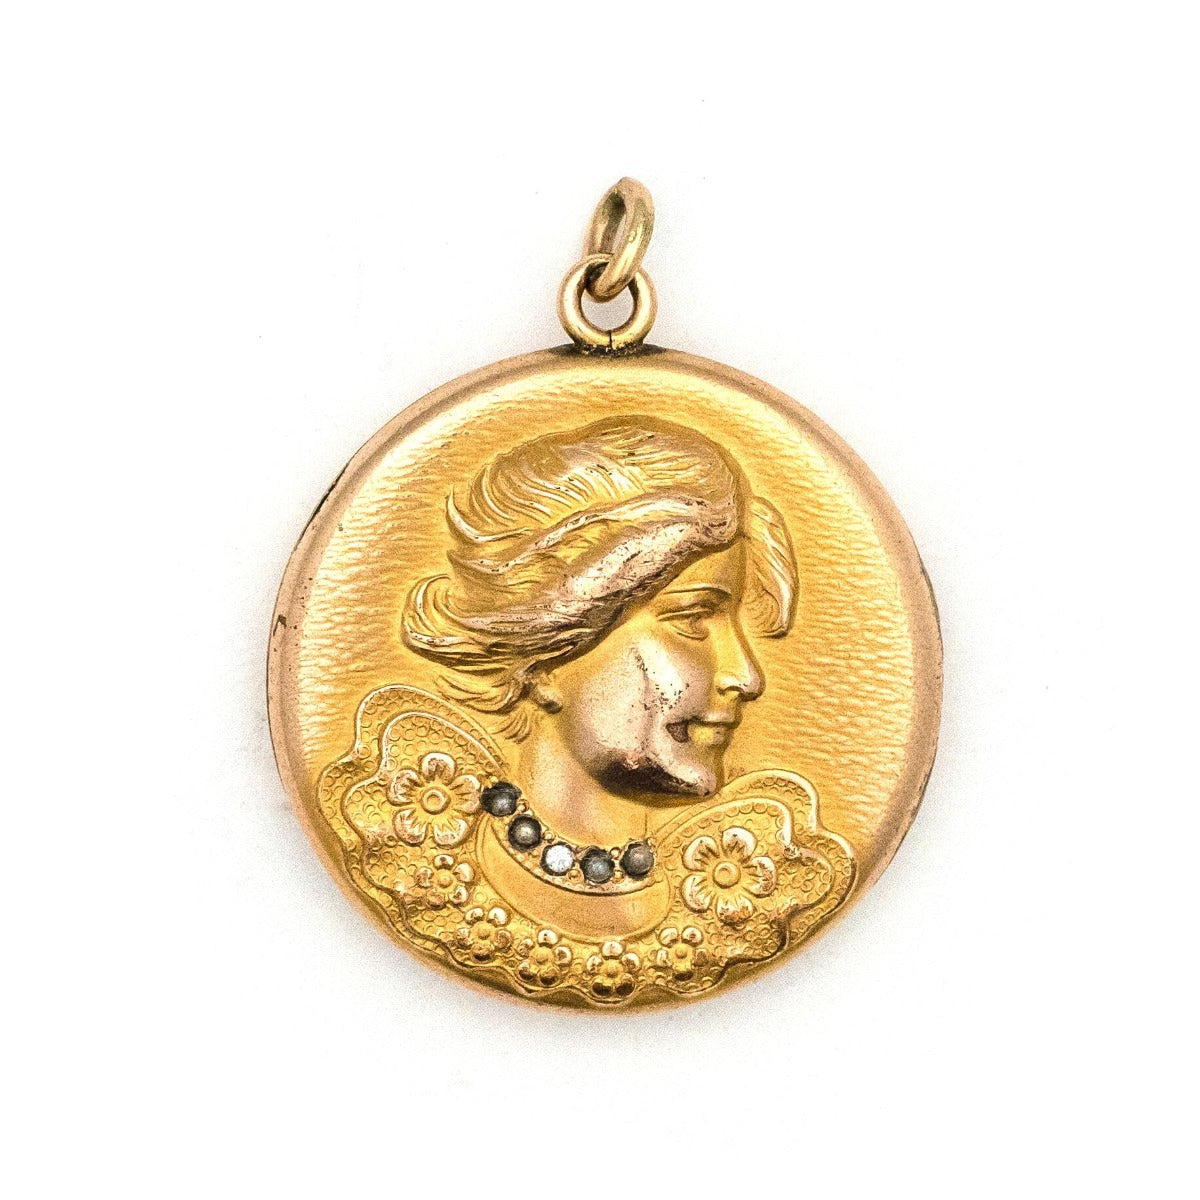 Bridgerton Antique Locket, woman in profile with necklace and flowers on collar, gold fill Victorian locket, front view